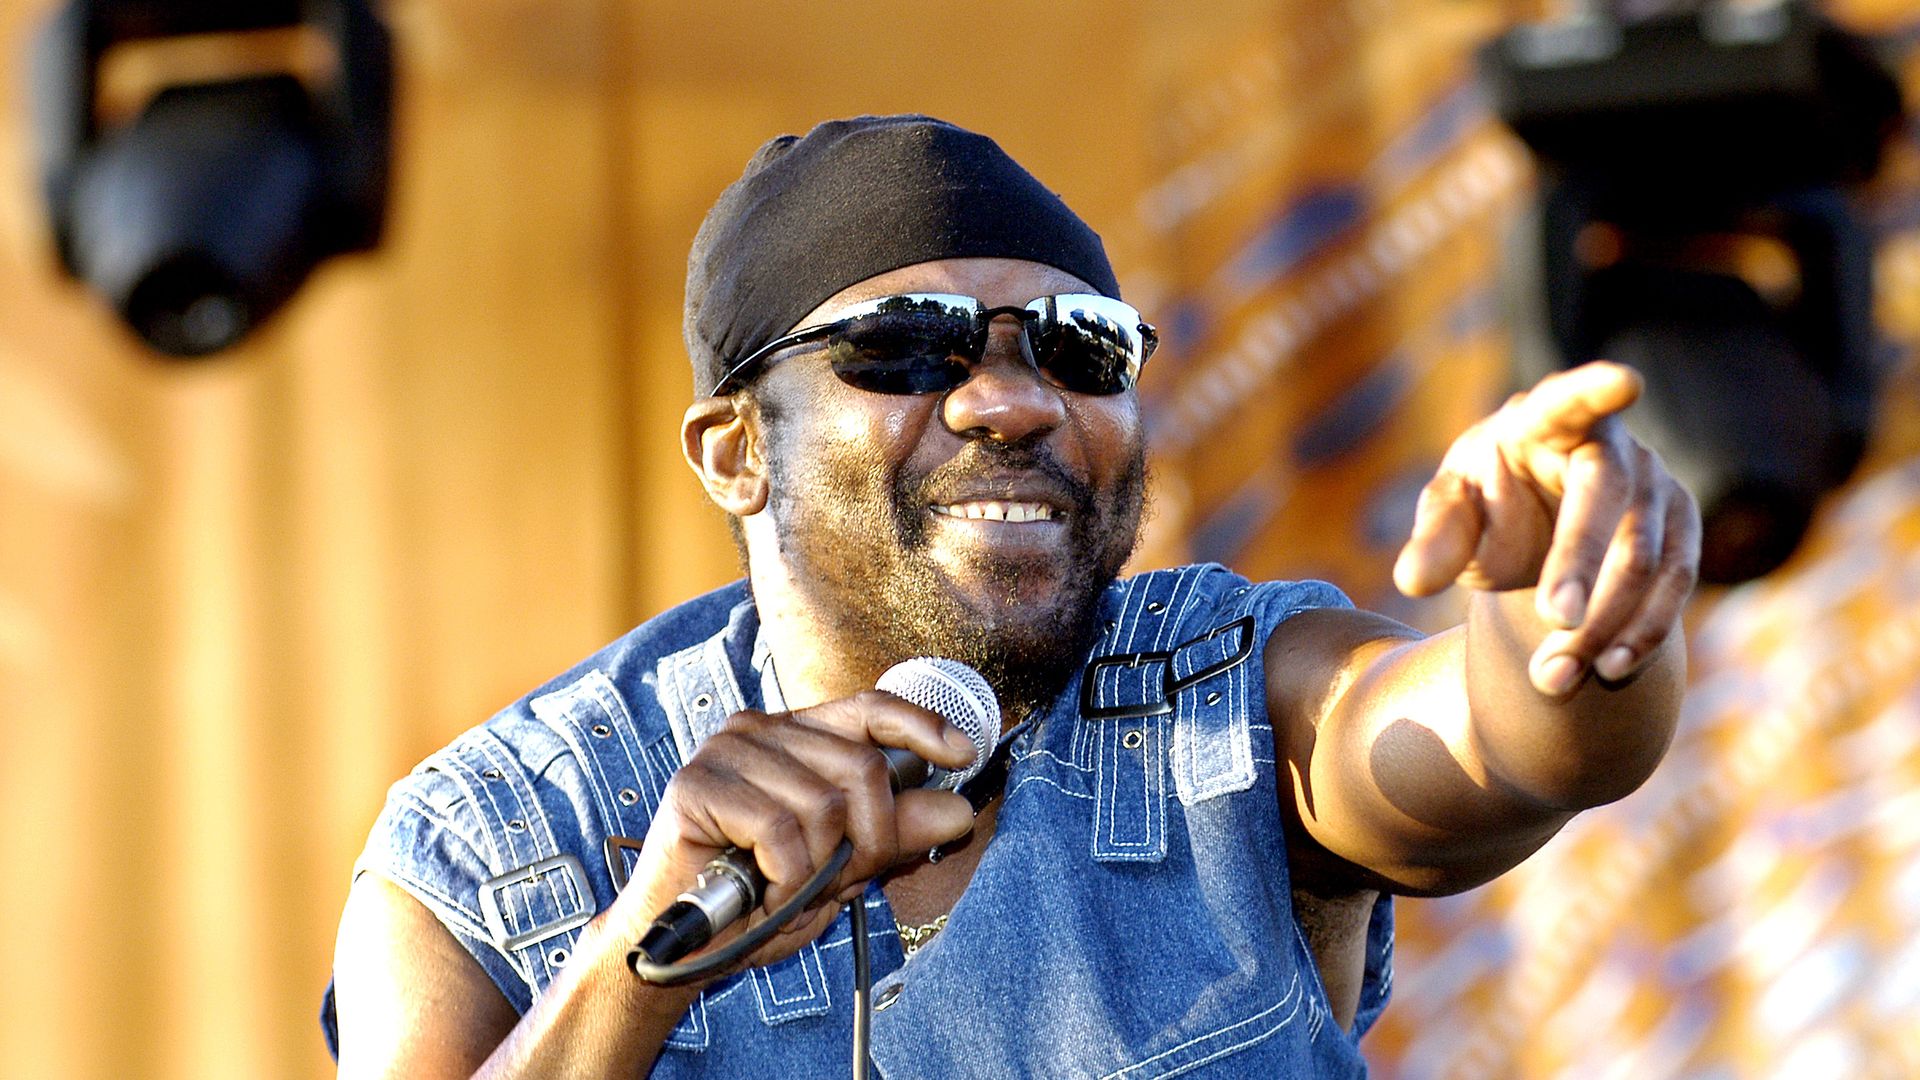 Neste: Funky Kingston av Toots And The Maytals